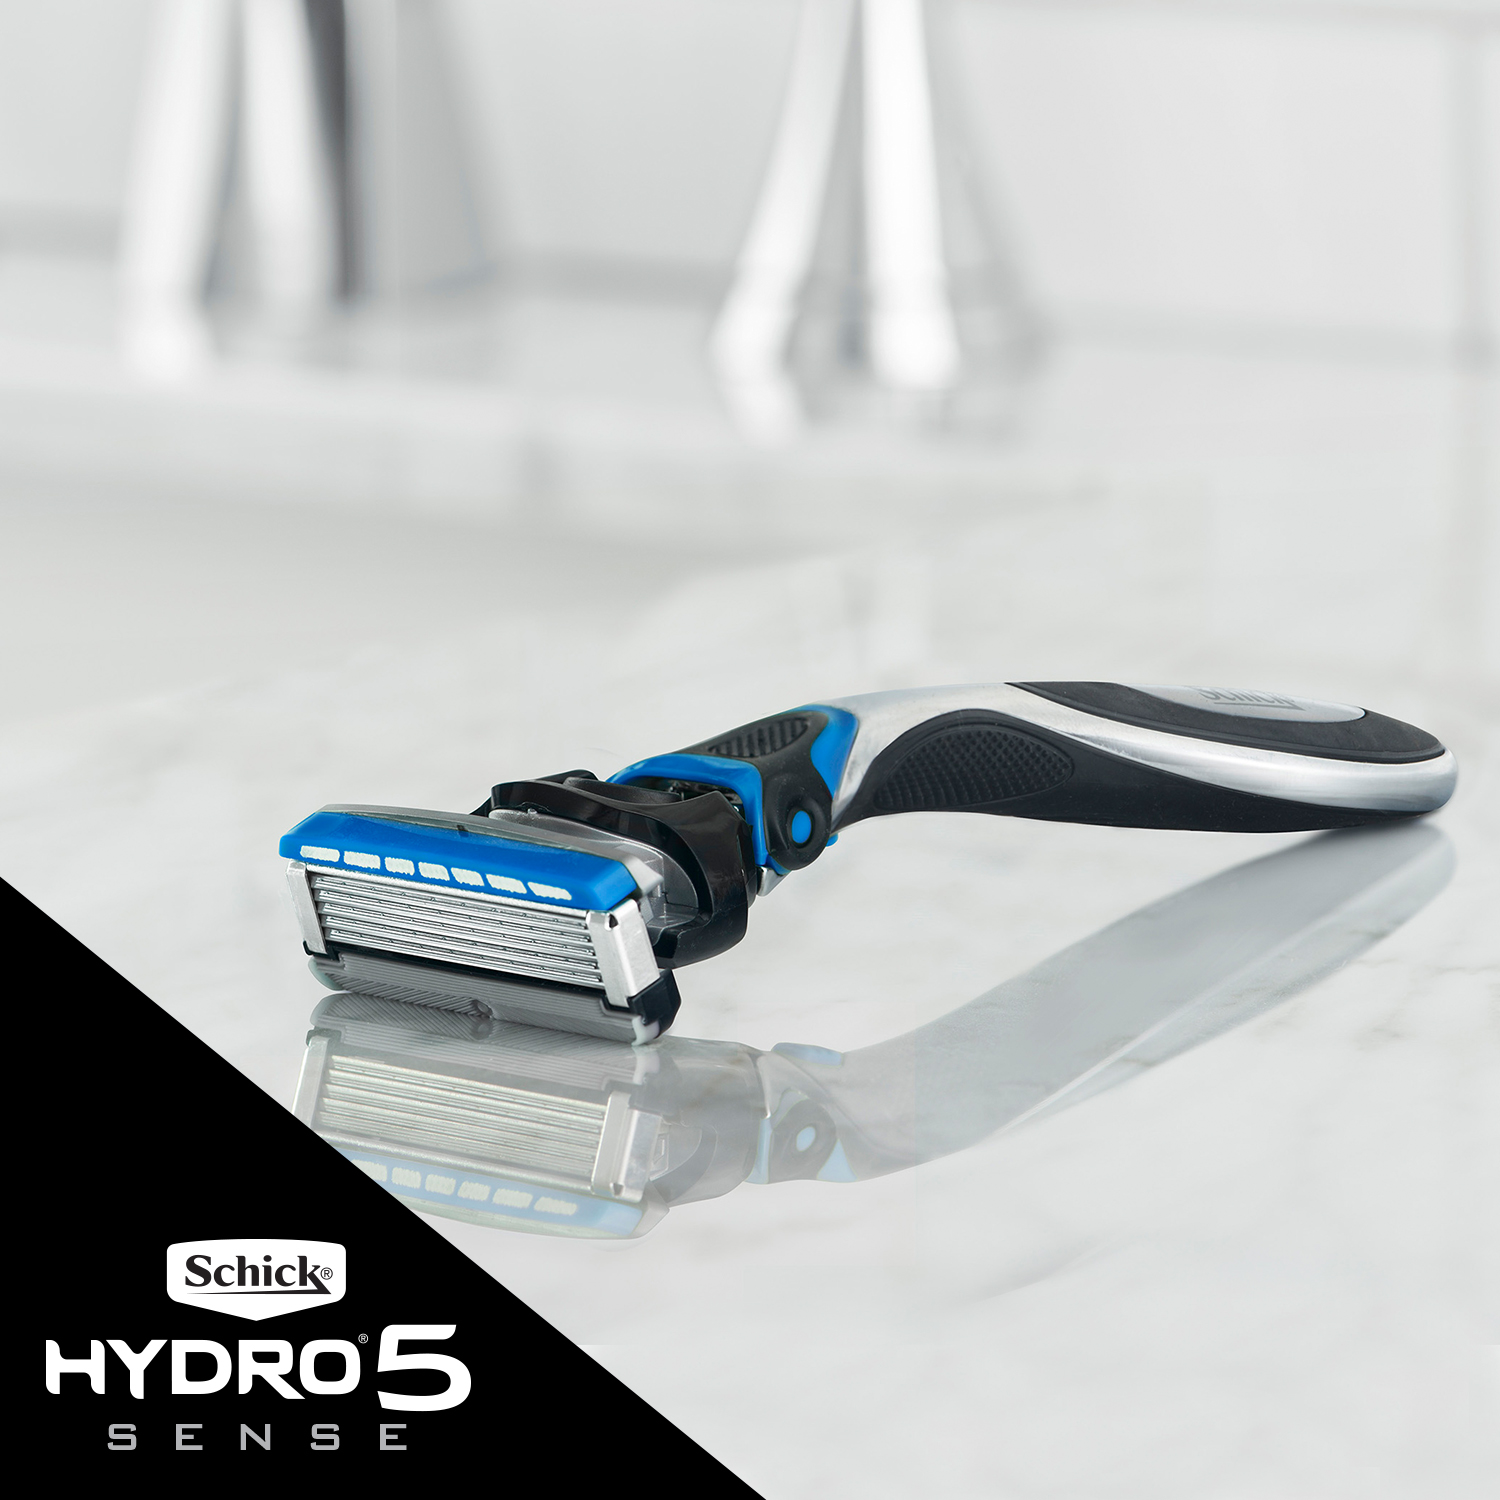 EPC_1226941_CP_MShave_Hydro5_Amazon_HYDRATELifestyle_Product_1_B.jpg